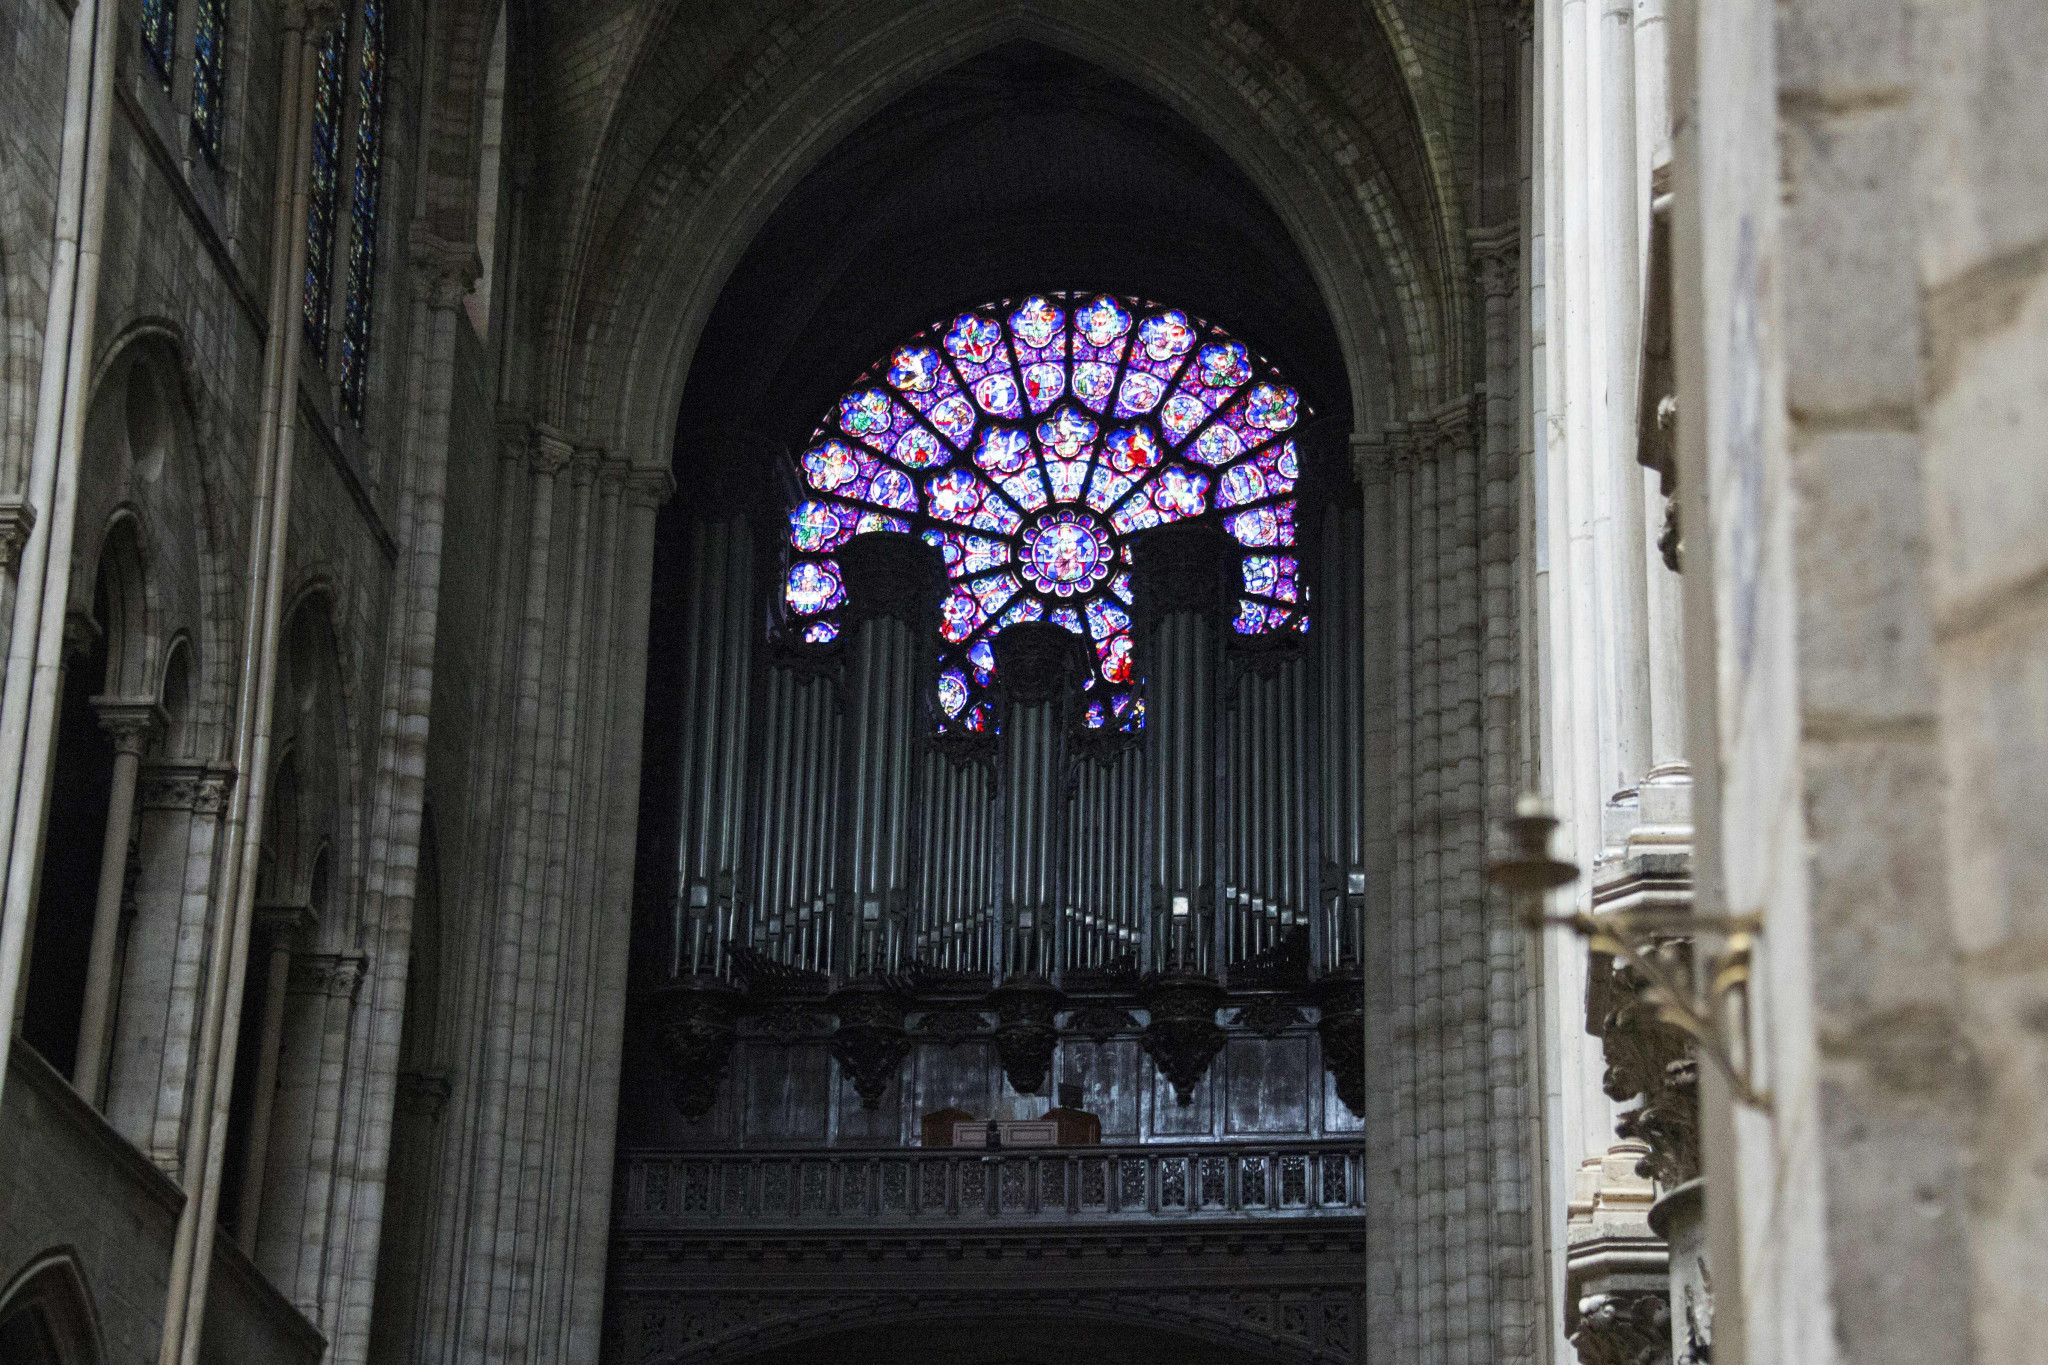 Work begins on restoring organ at Notre-Dame to its full voice in time for Paris 2024